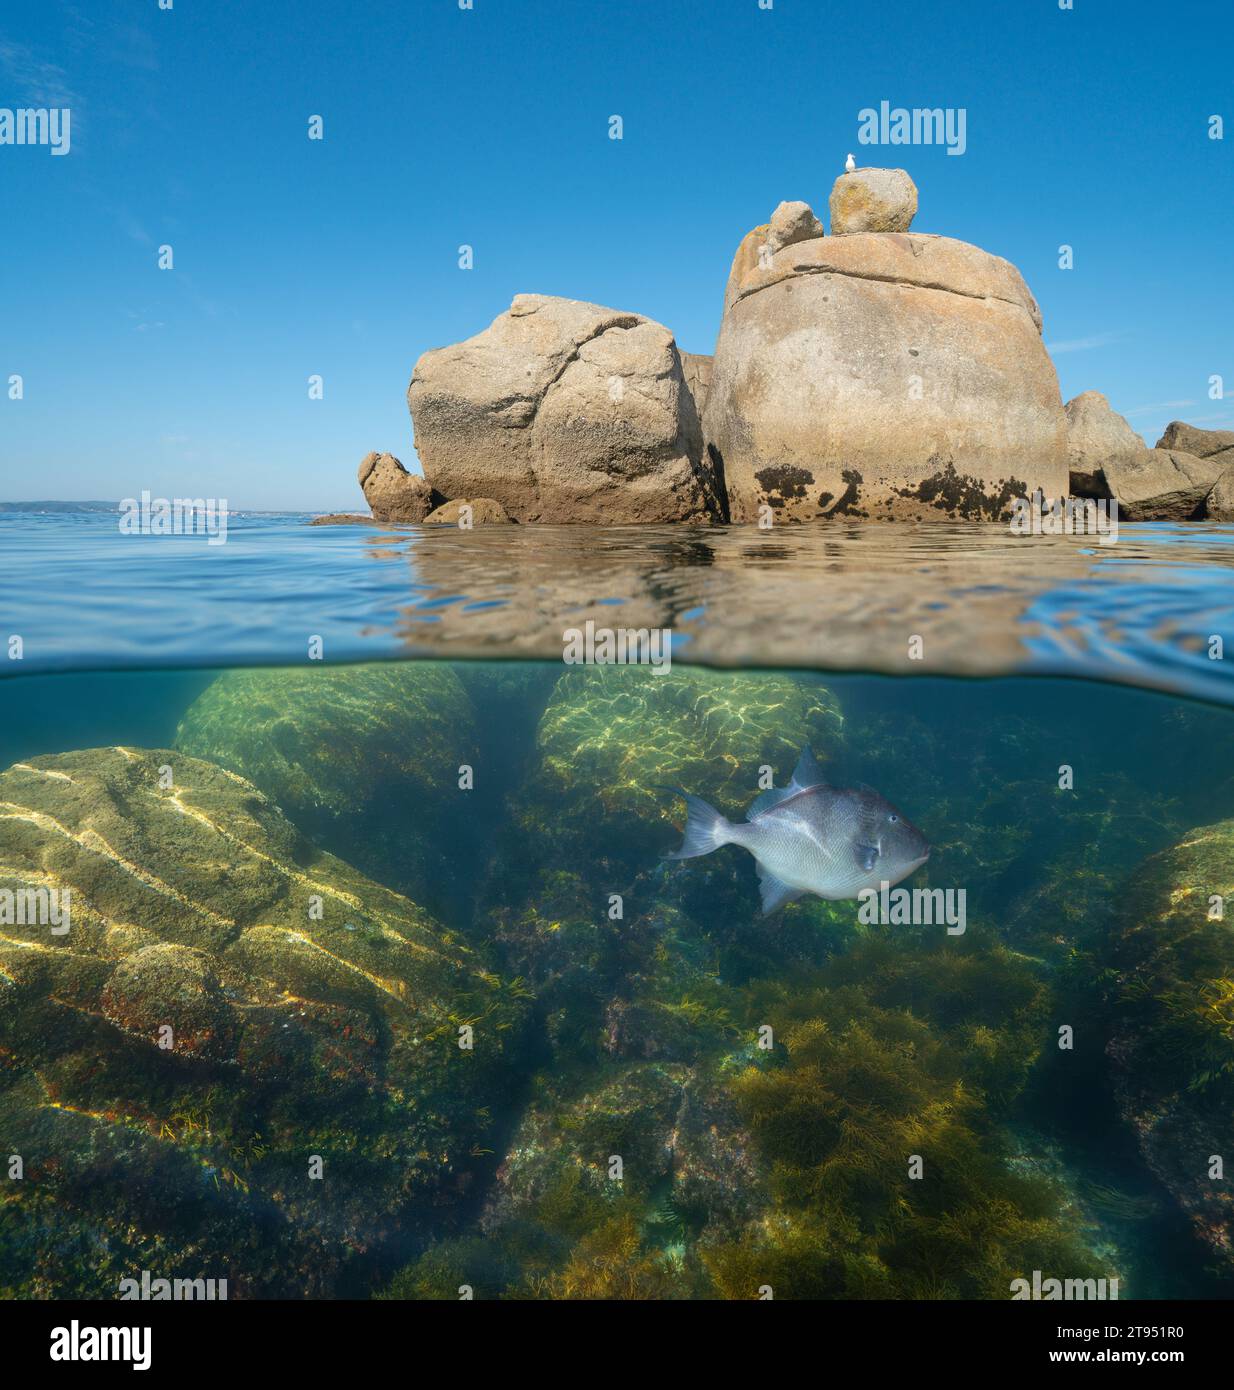 Seascape boulders in the Atlantic ocean split view over and under water surface, natural scene, Spain, Galicia, Rias Baixas Stock Photo